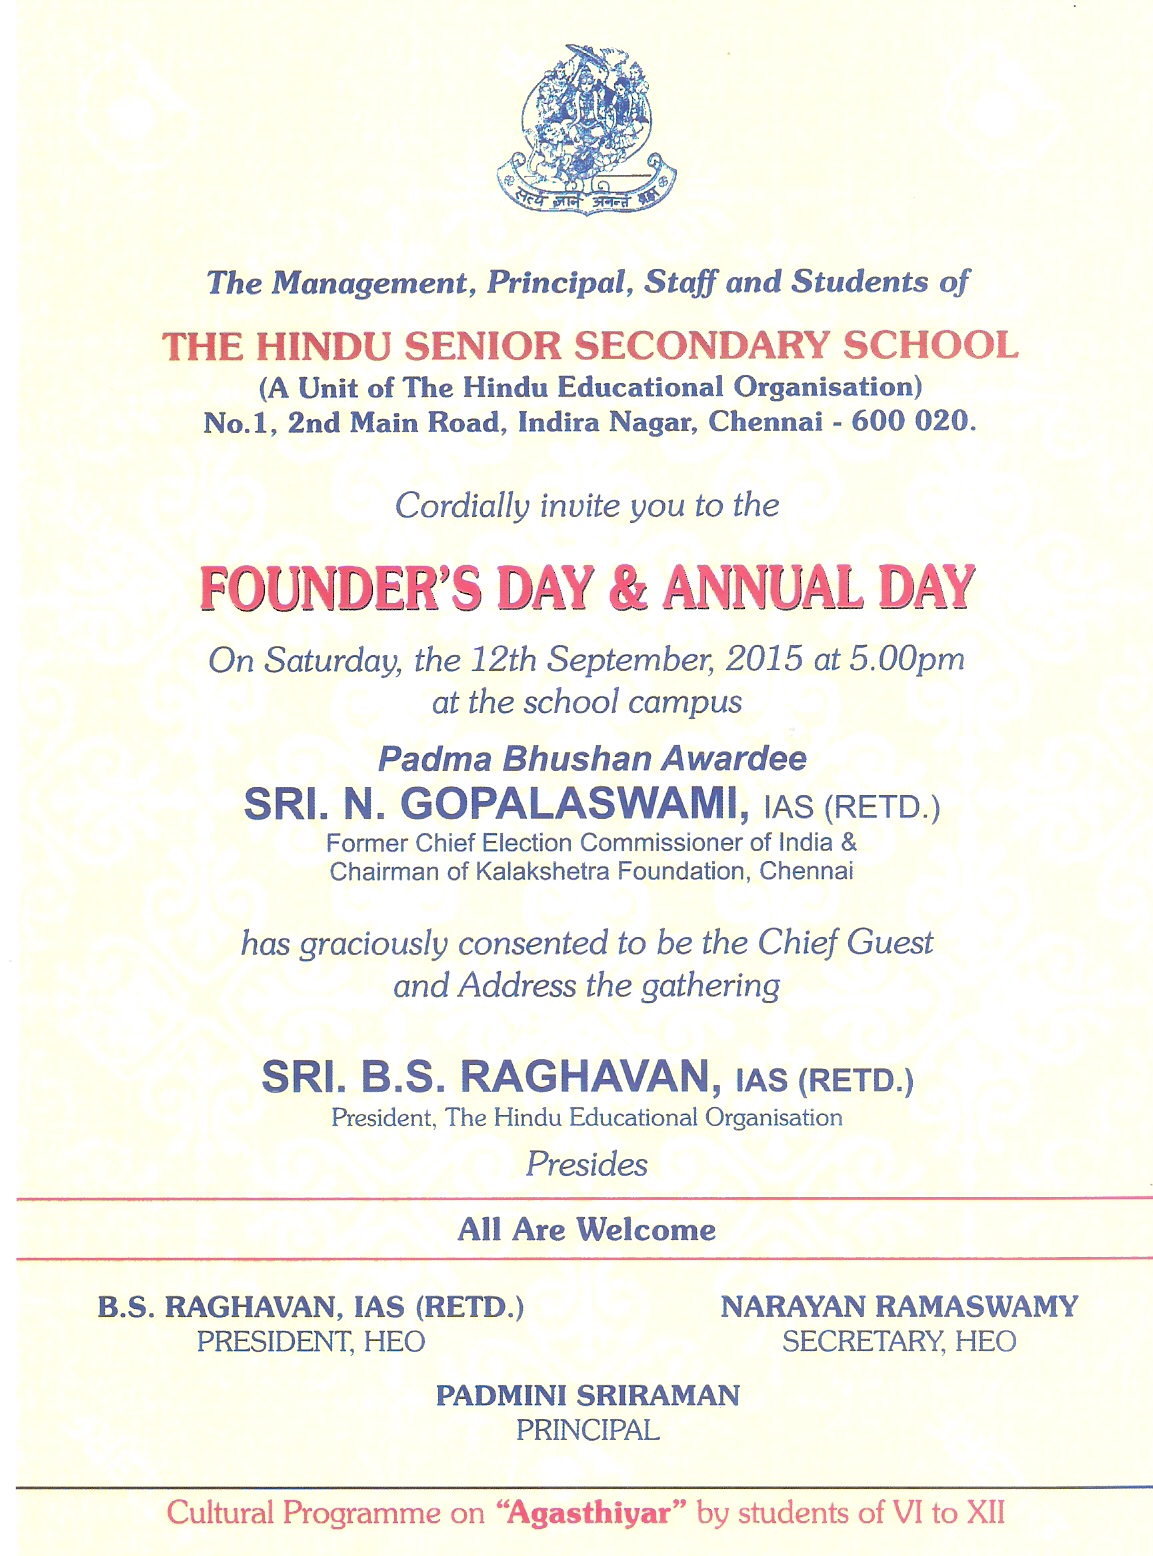 FOUNDER’S DAY & ANNUAL DAY 2015